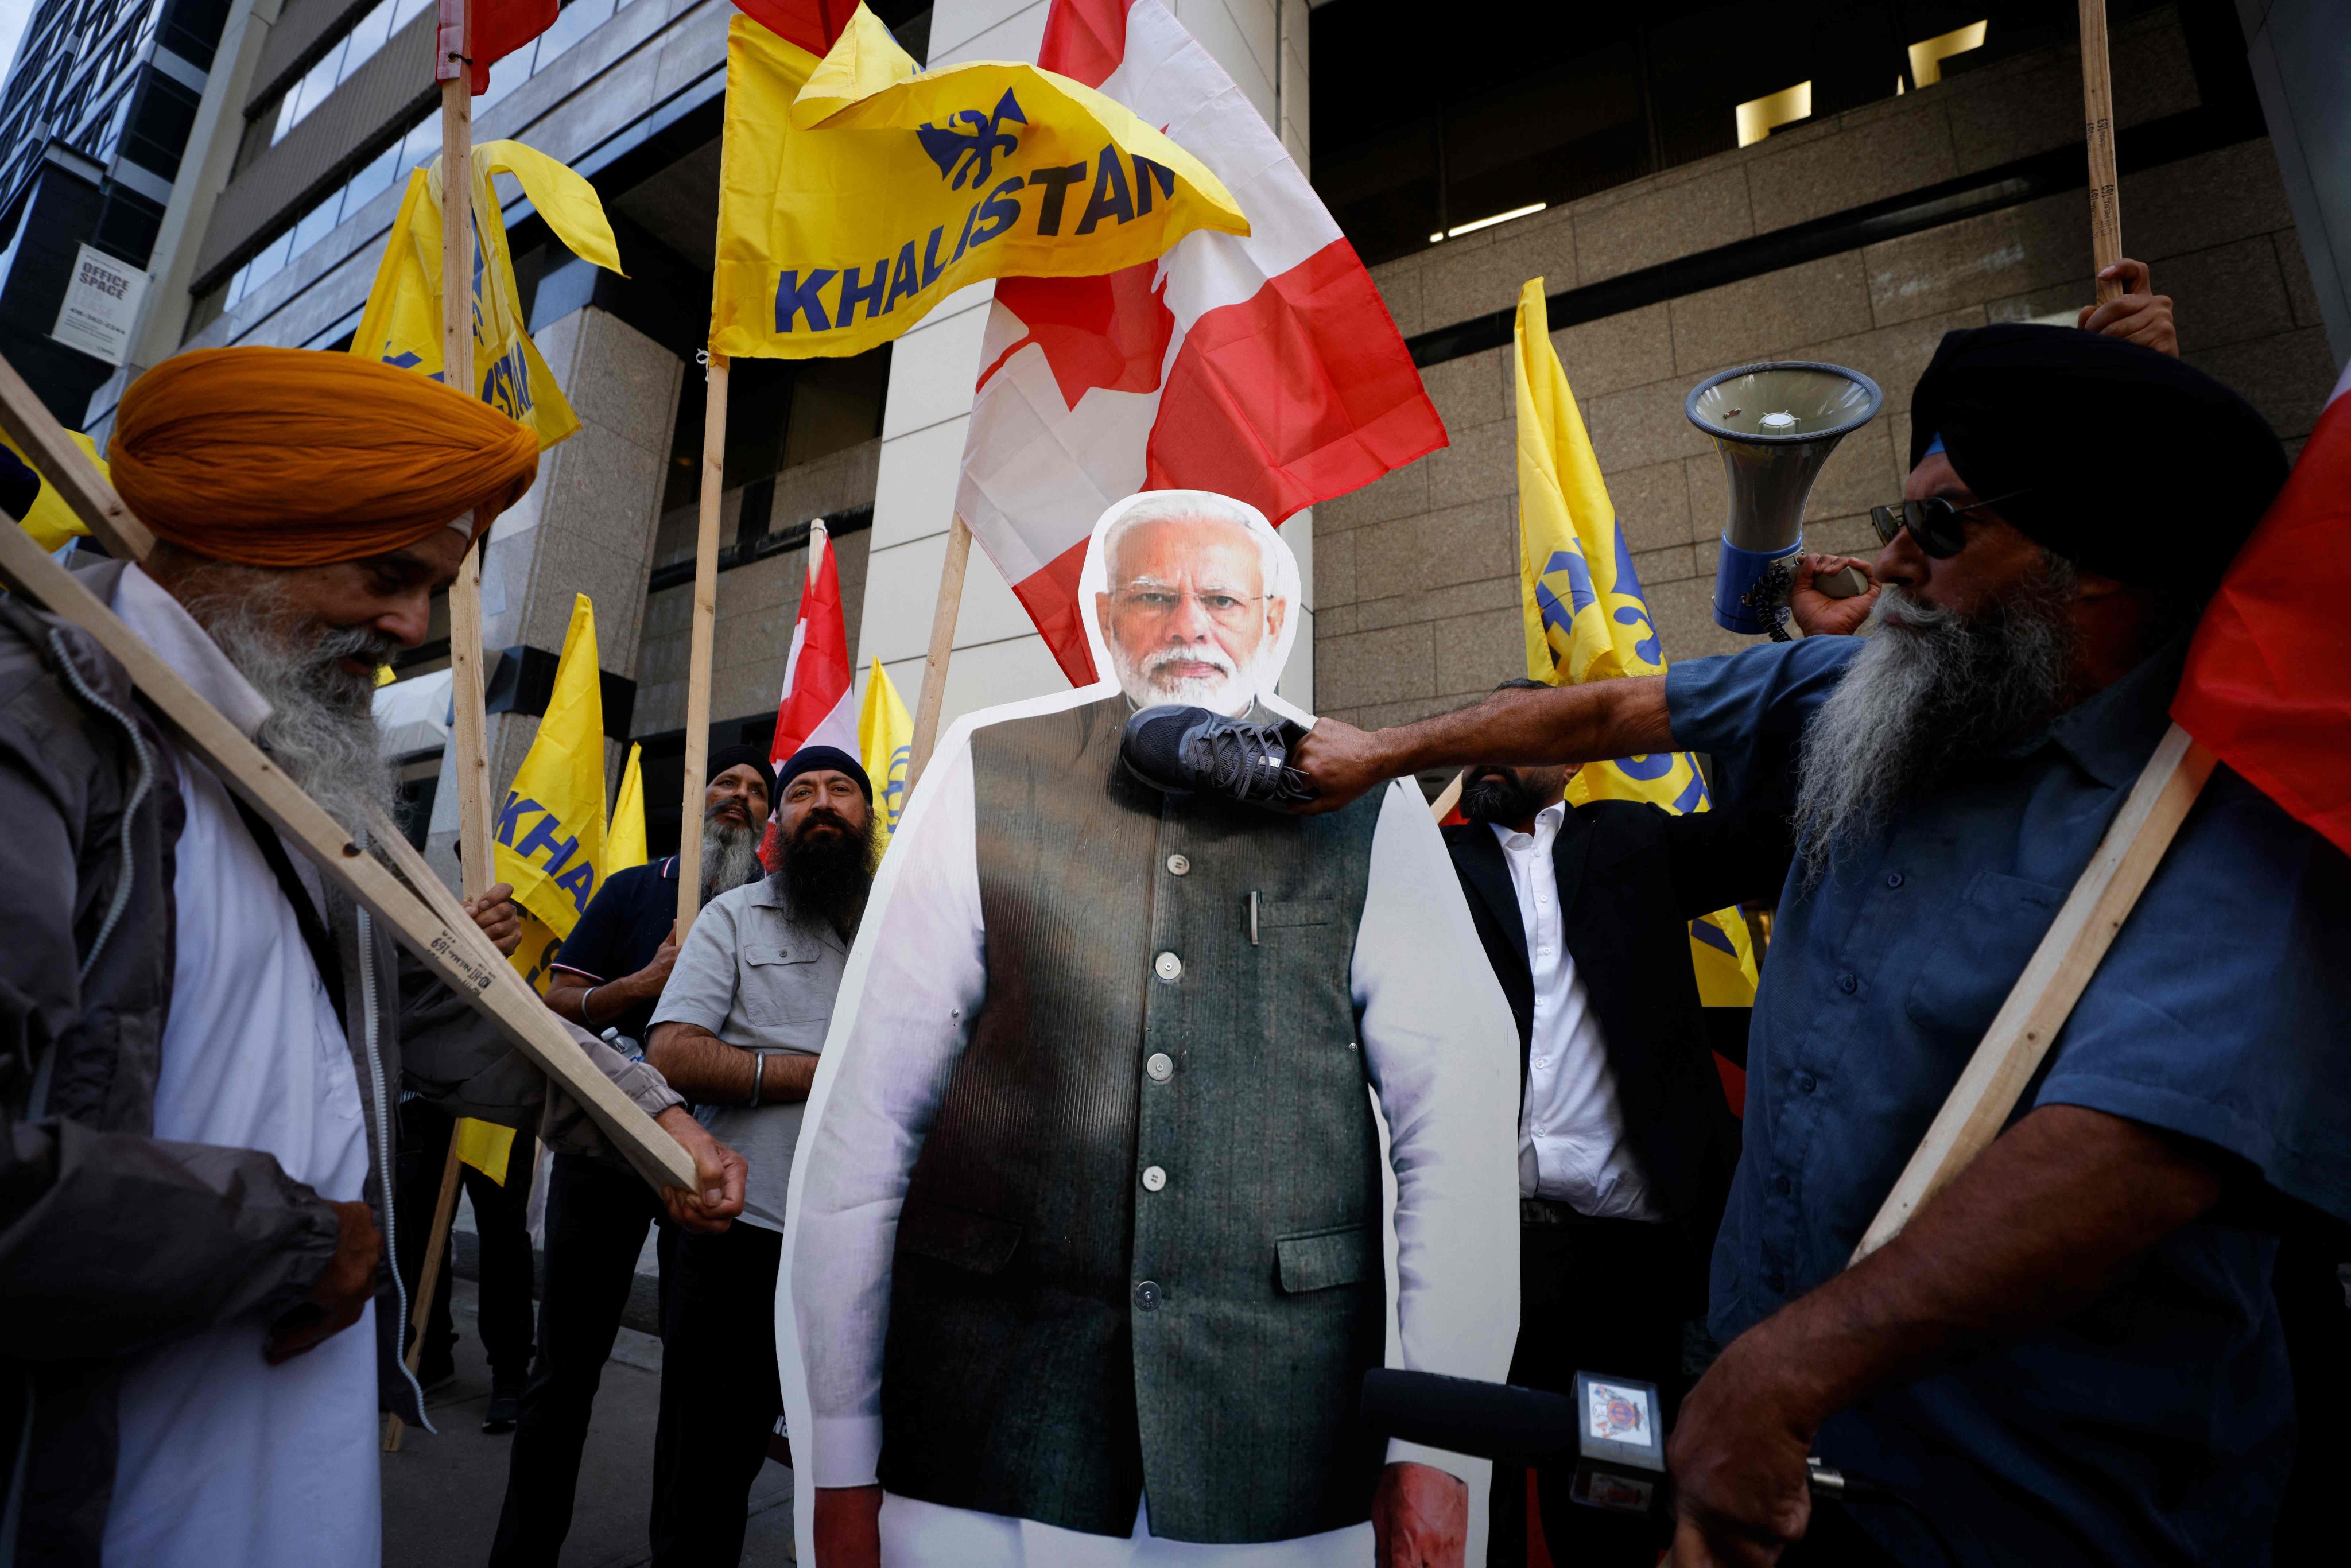 Protesters use their shoes to hit a placard depicting Indian prime minister Narendra Modi during a Sikh rally outside the Consulate General of India in Toronto. Photo: AFP